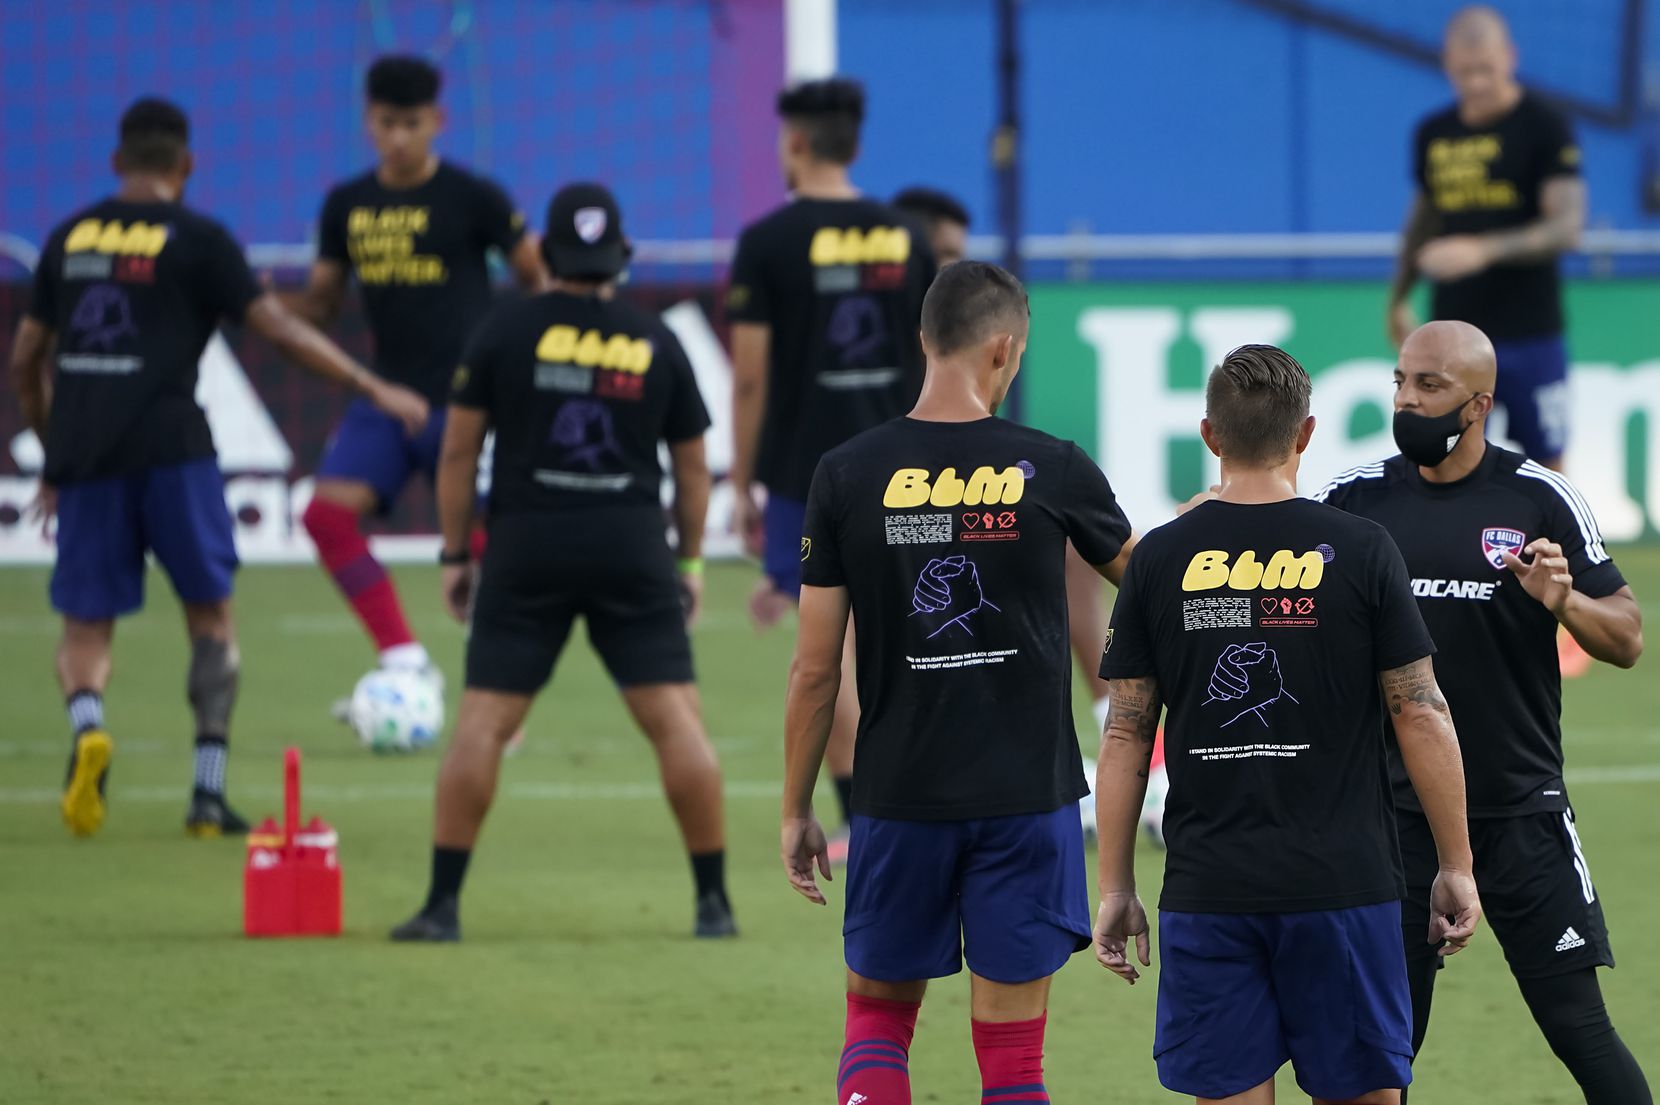 FC Dallas players wear shirts in support of Black Lives Matter before an MLS soccer game against the Nashville SC at Toyota Stadium on Wednesday, Aug. 12, 2020, in Frisco, Texas. (Smiley N. Pool/The Dallas Morning News)